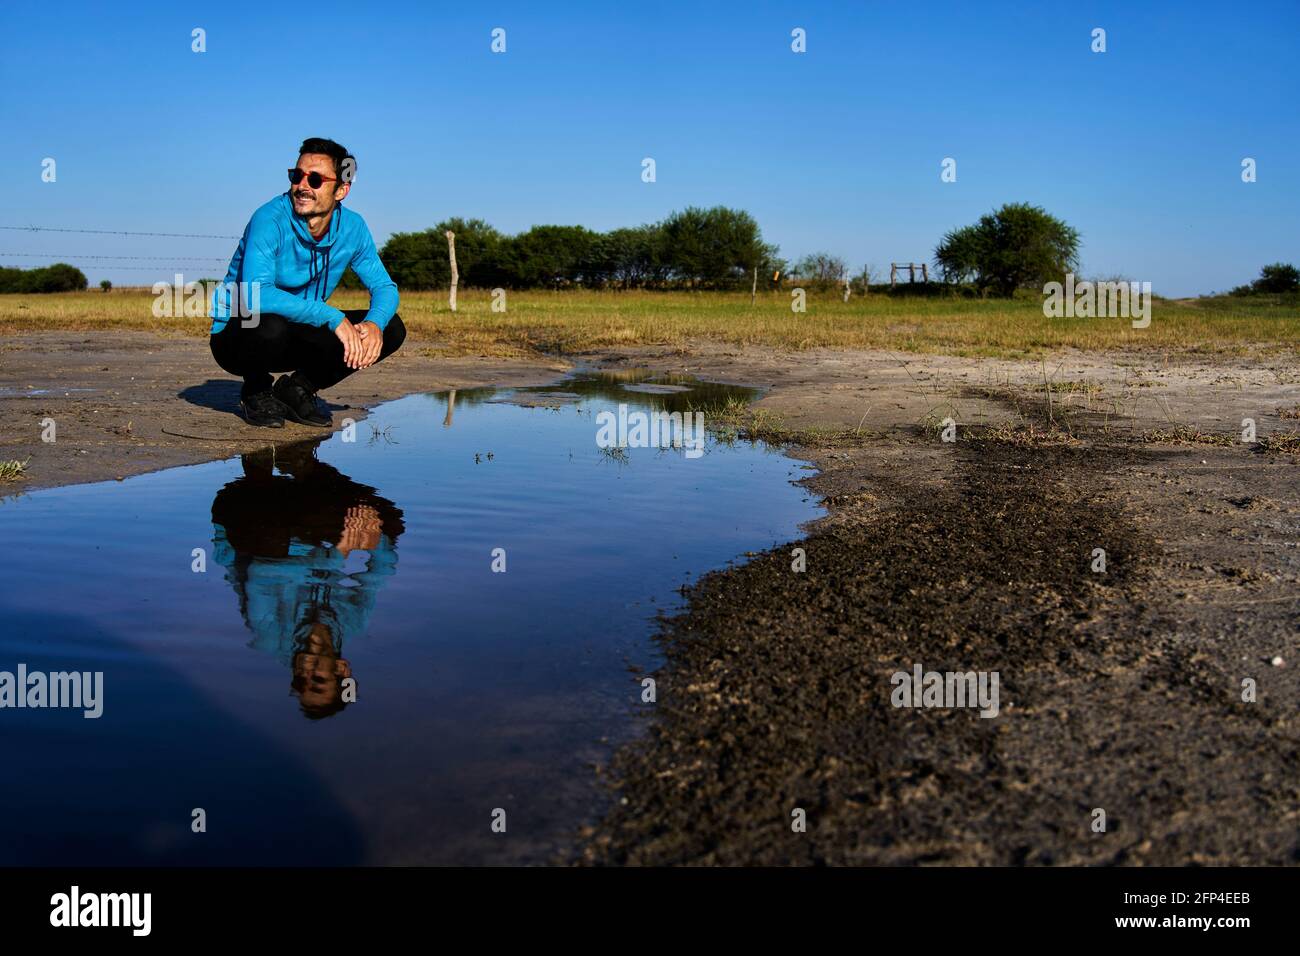 Young man smiling reflected in water Stock Photo